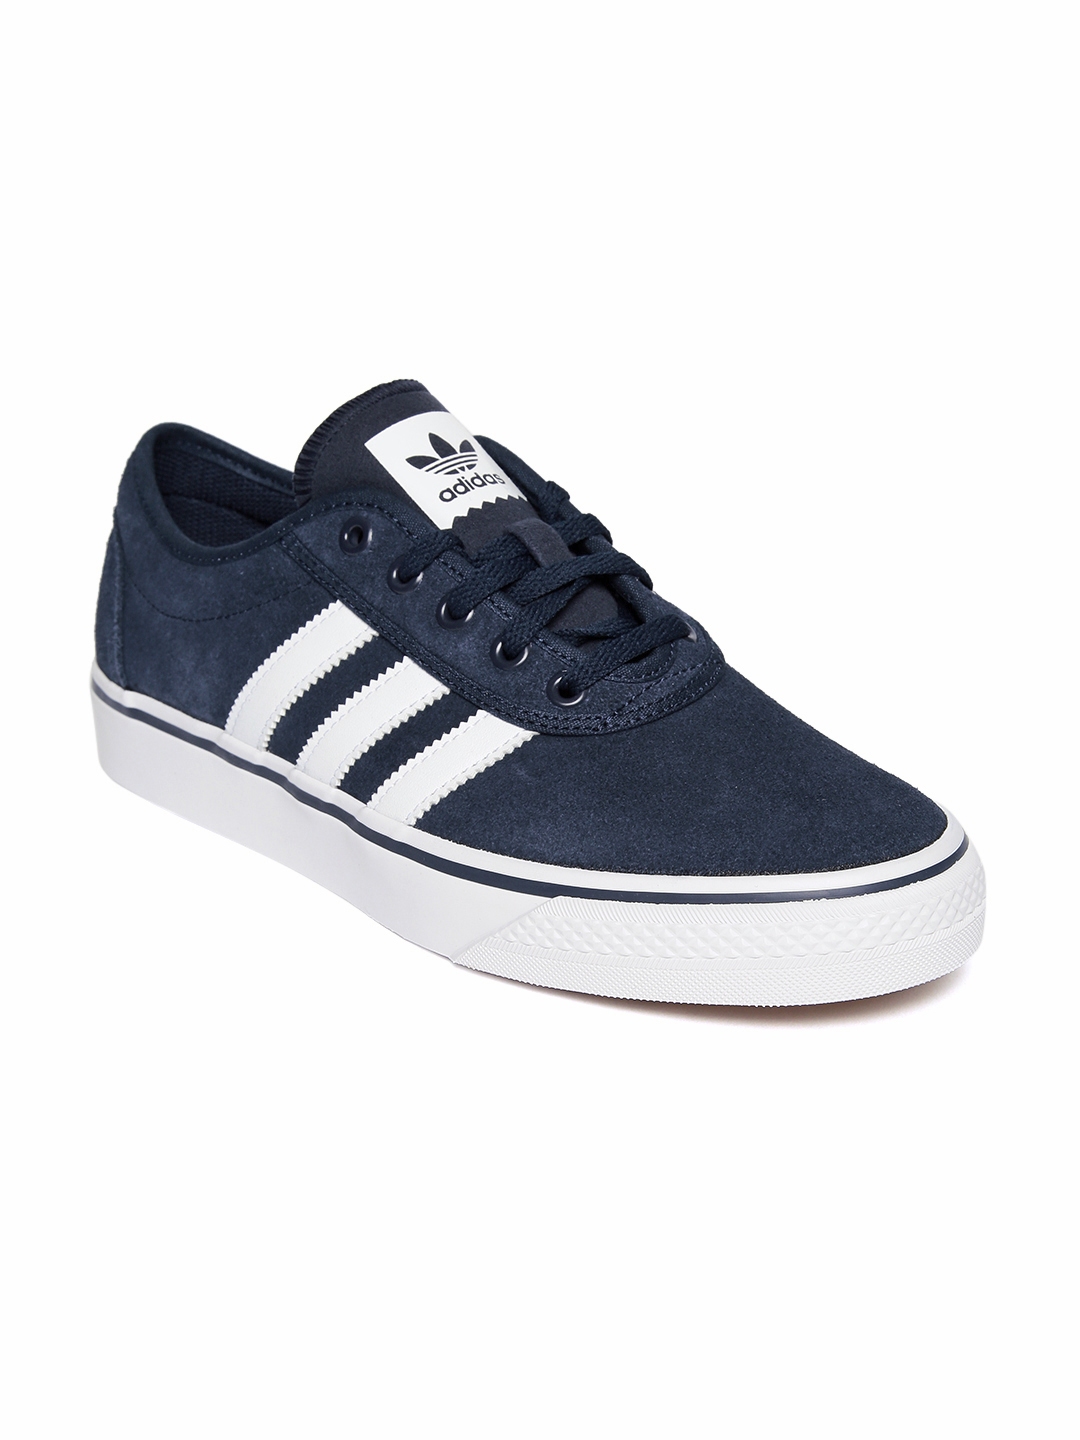 Buy ADIDAS Originals Unisex Blue ADI Ease Sneakers - Casual Shoes for ...